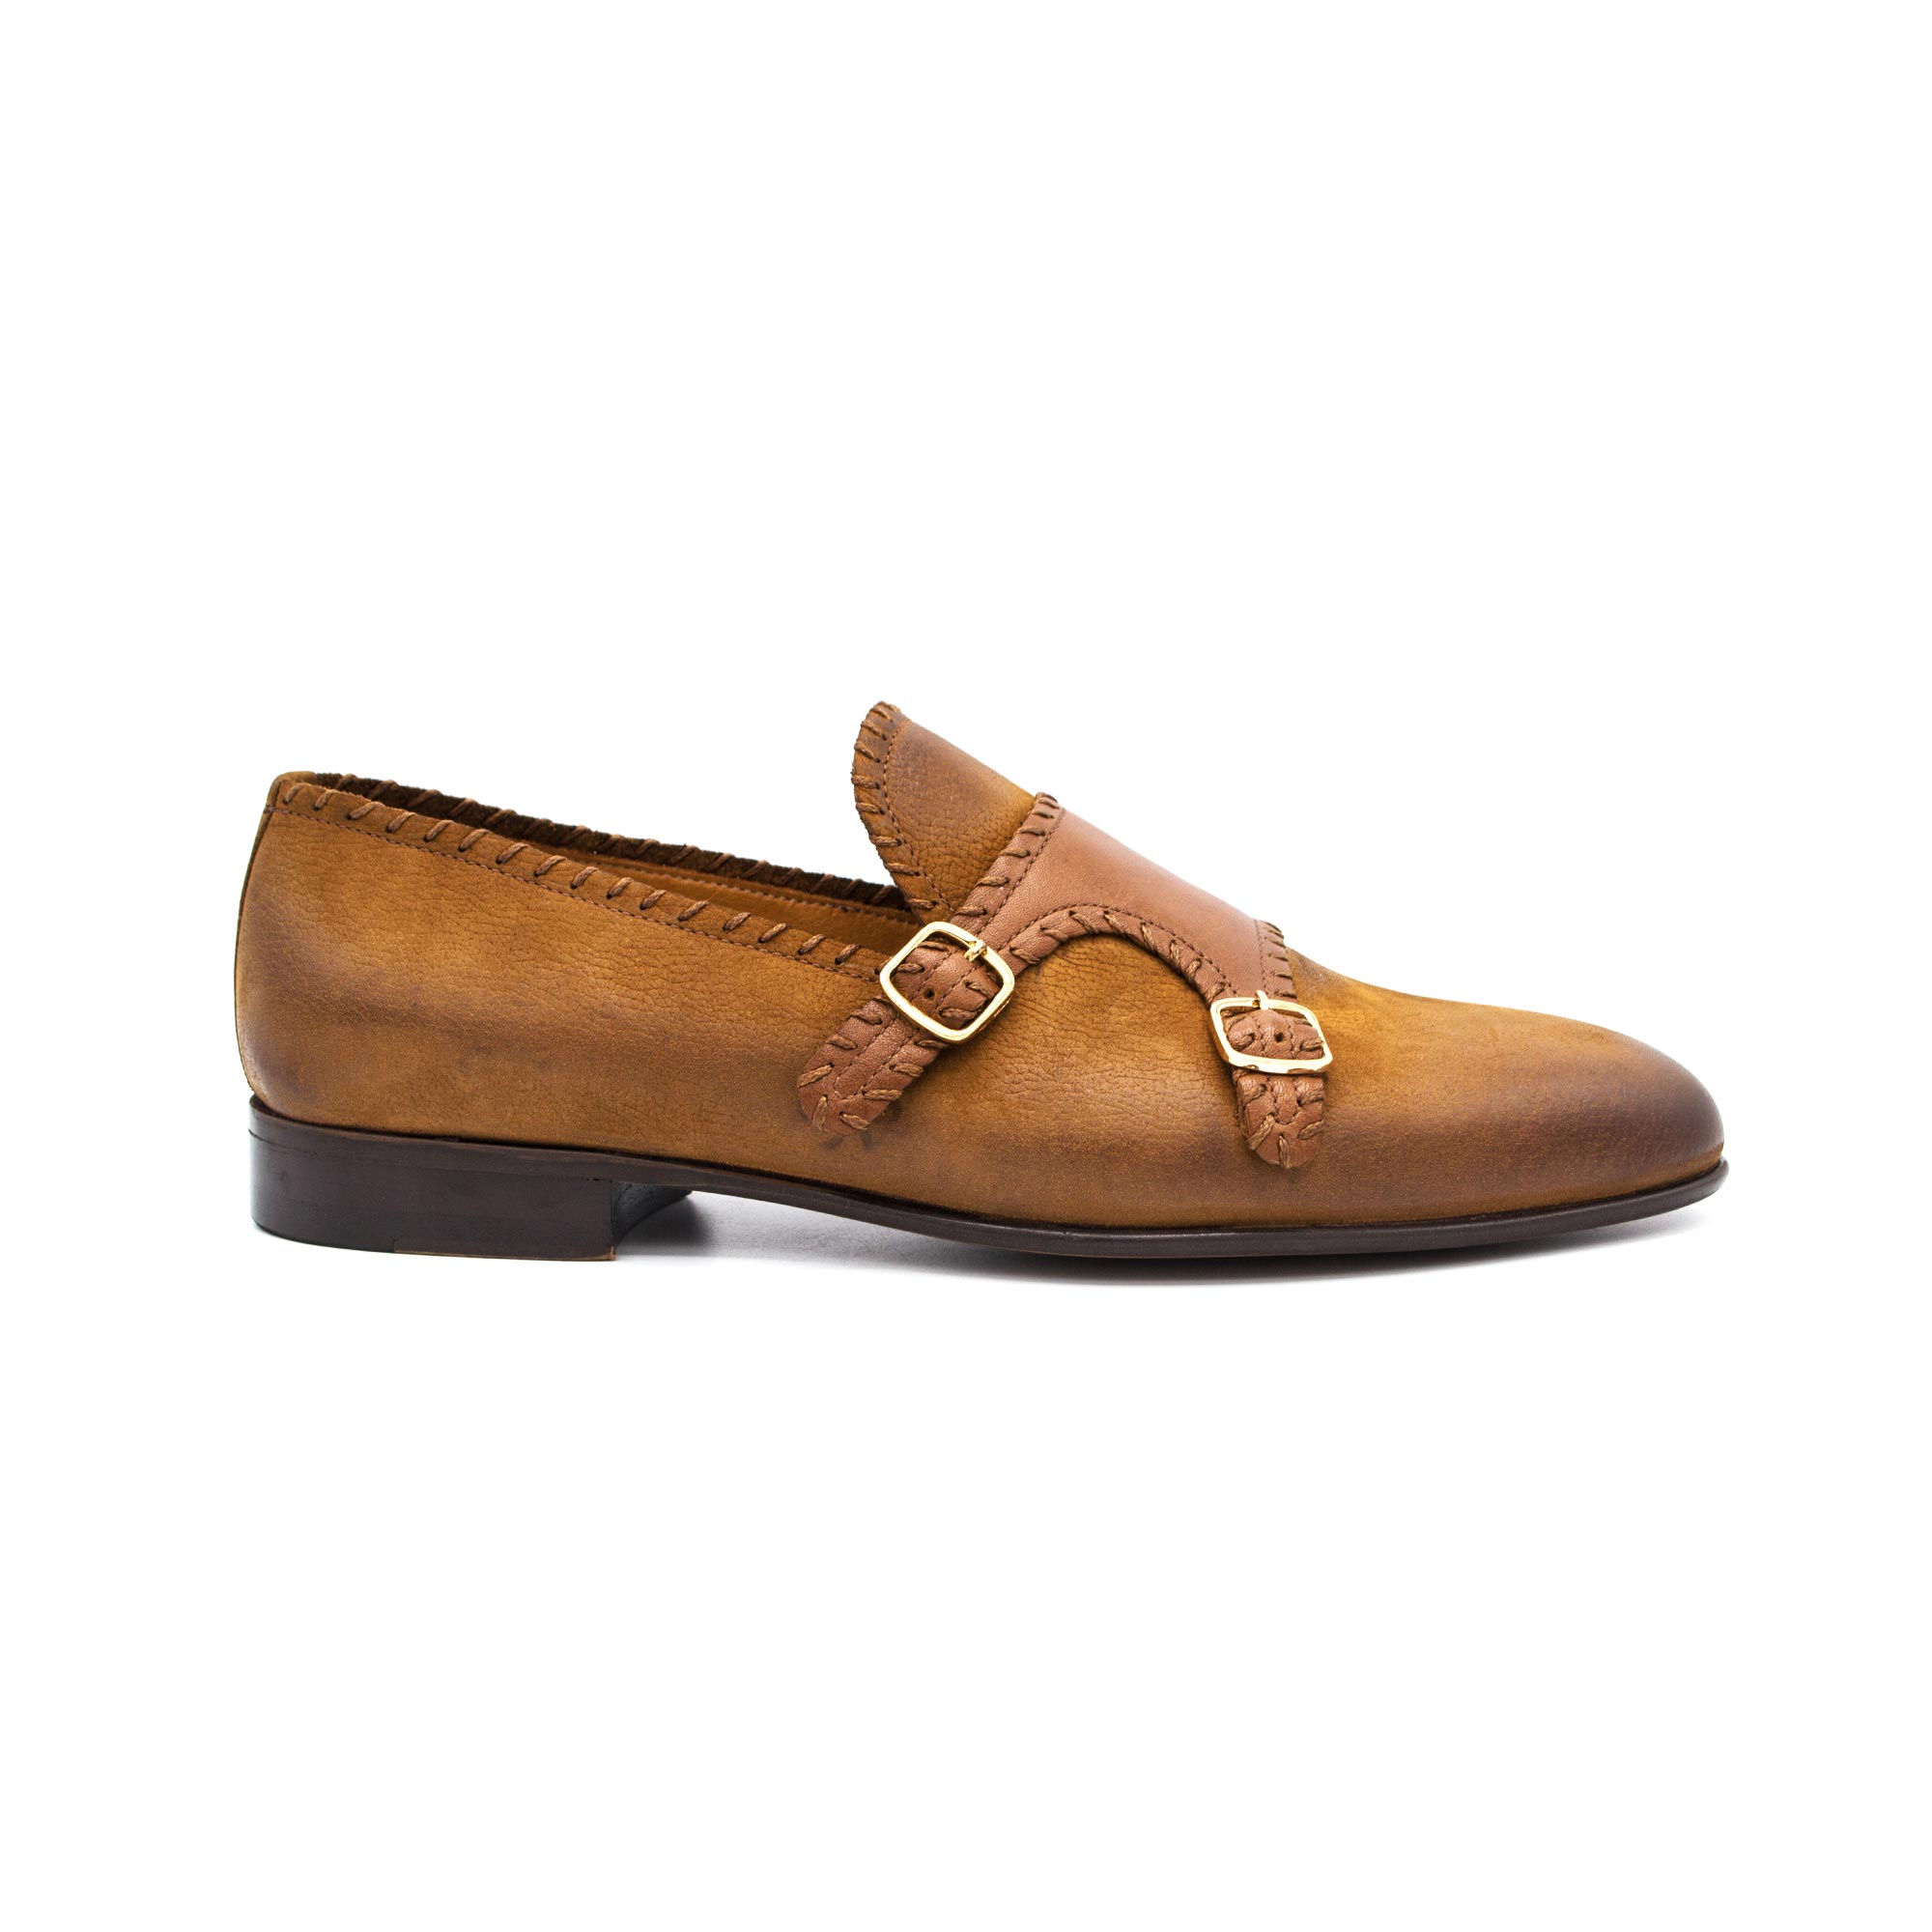 Tobacco Brown Nubuck Leather Monk Strap Shoes | Zerbay Collection